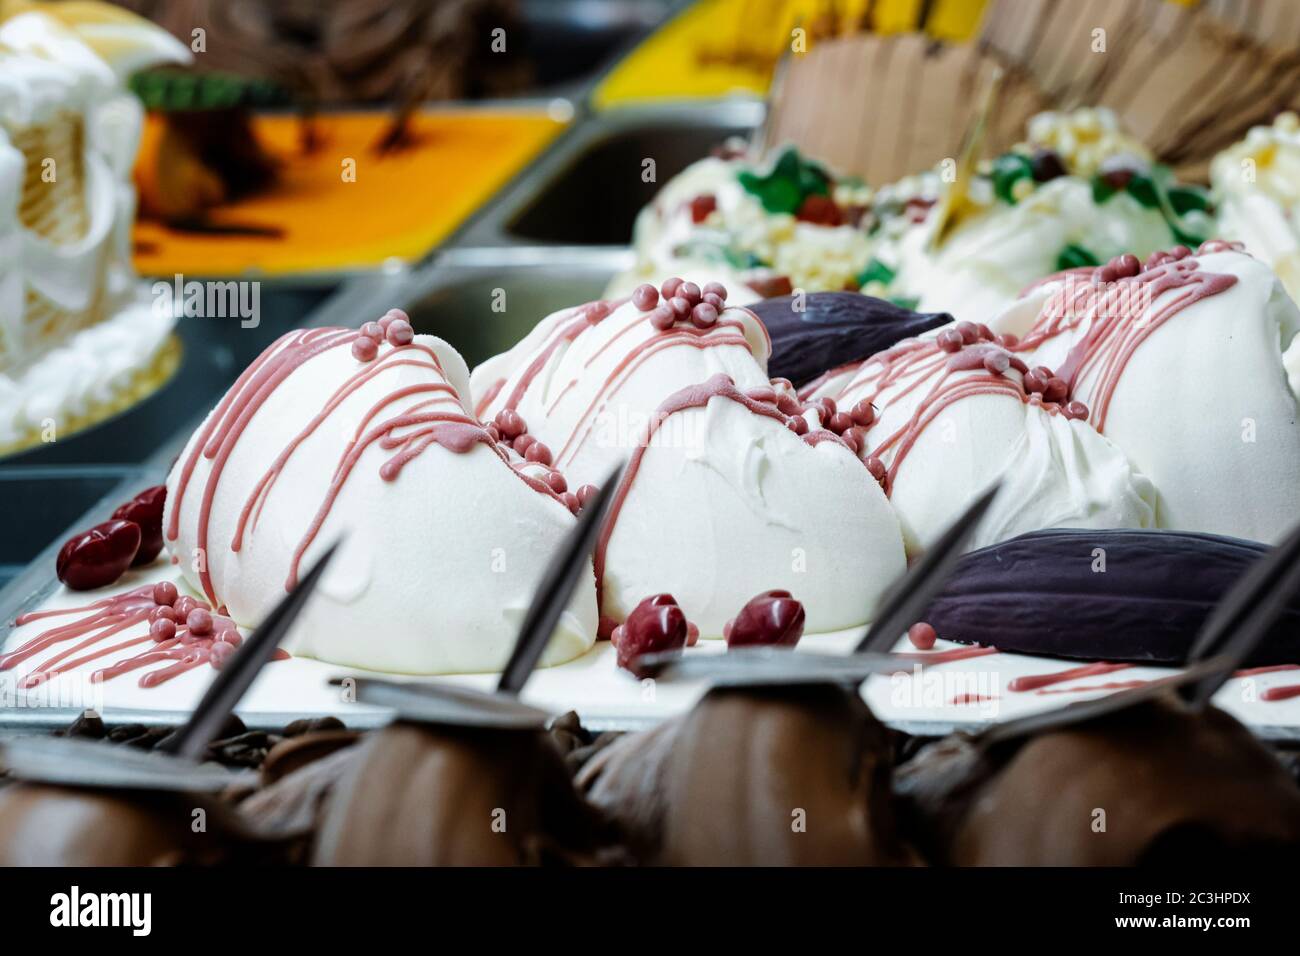 Strawberry cream ice cream in a display case with different ice cream tubs Stock Photo